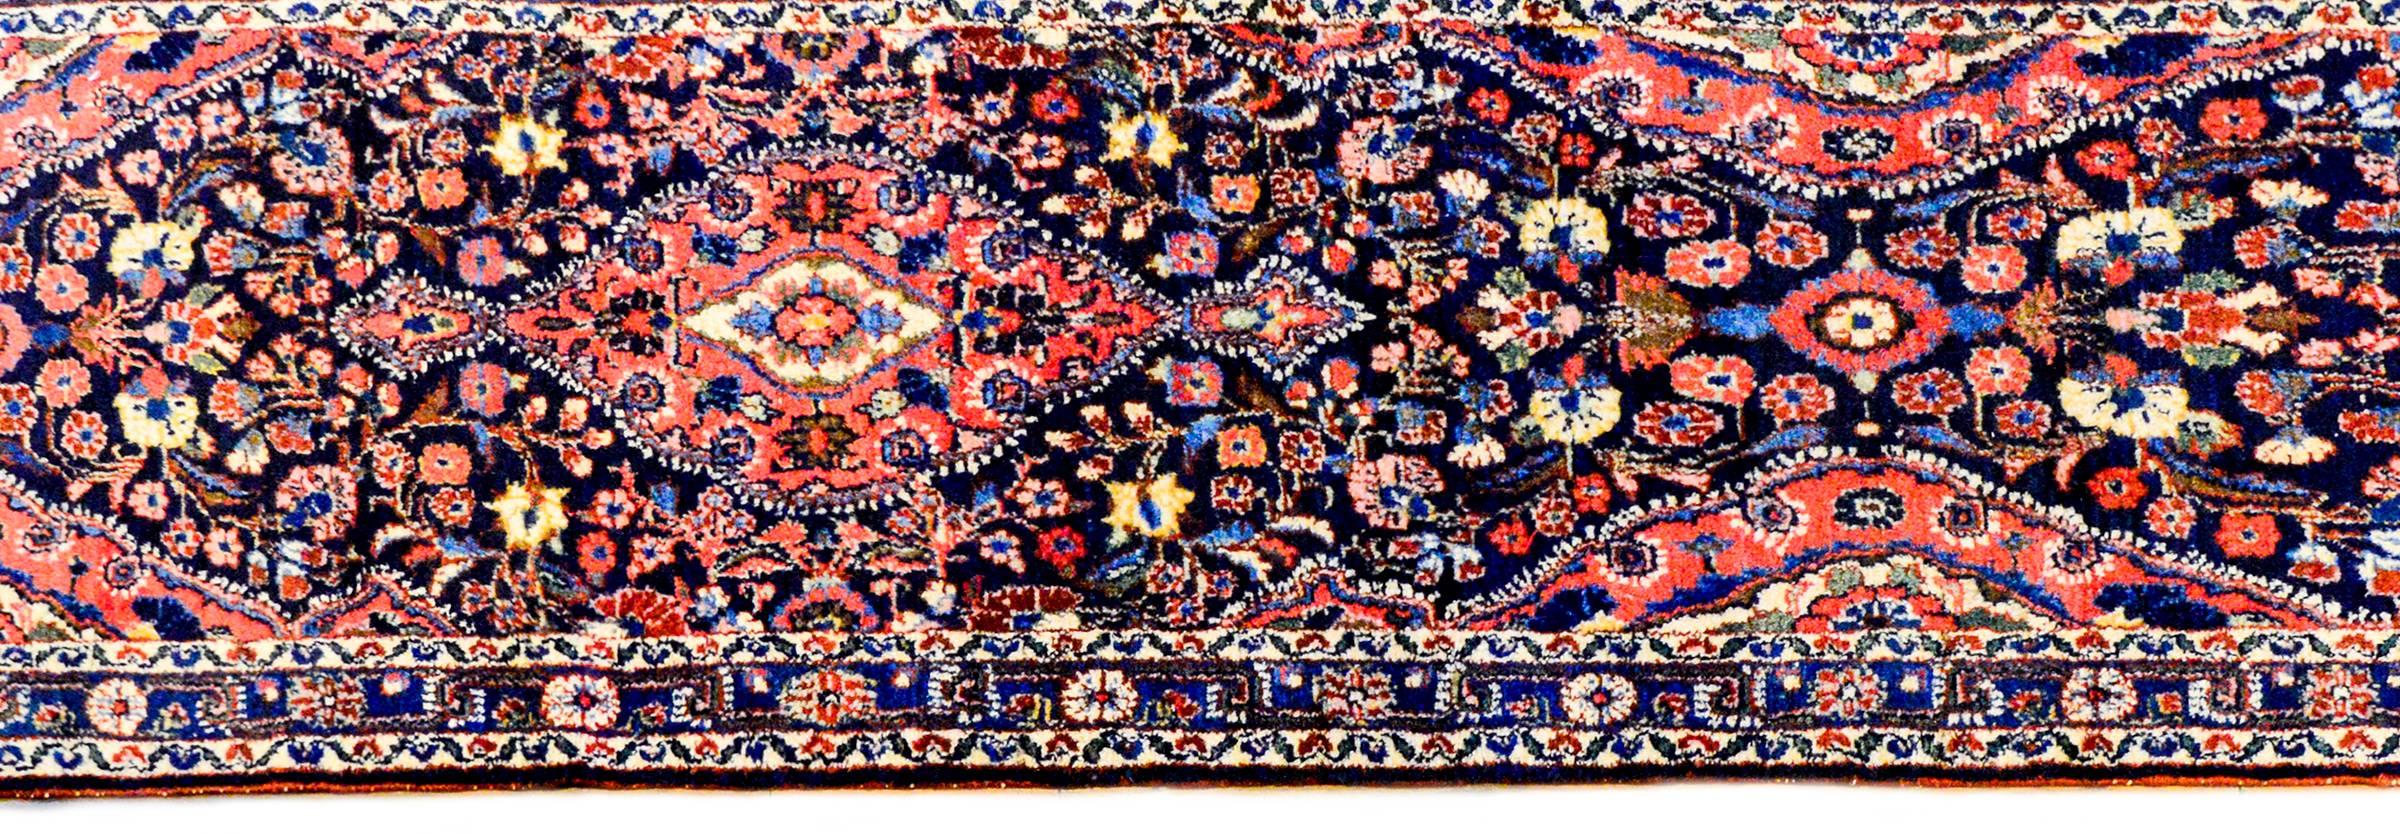 An exceptional early 20th century Persian Lilihan runner with an incredibly woven field of flowers, woven in crimson, light and dark indigo, and natural undyed cream colored wool, on a black background. The border is narrow, with a central floral